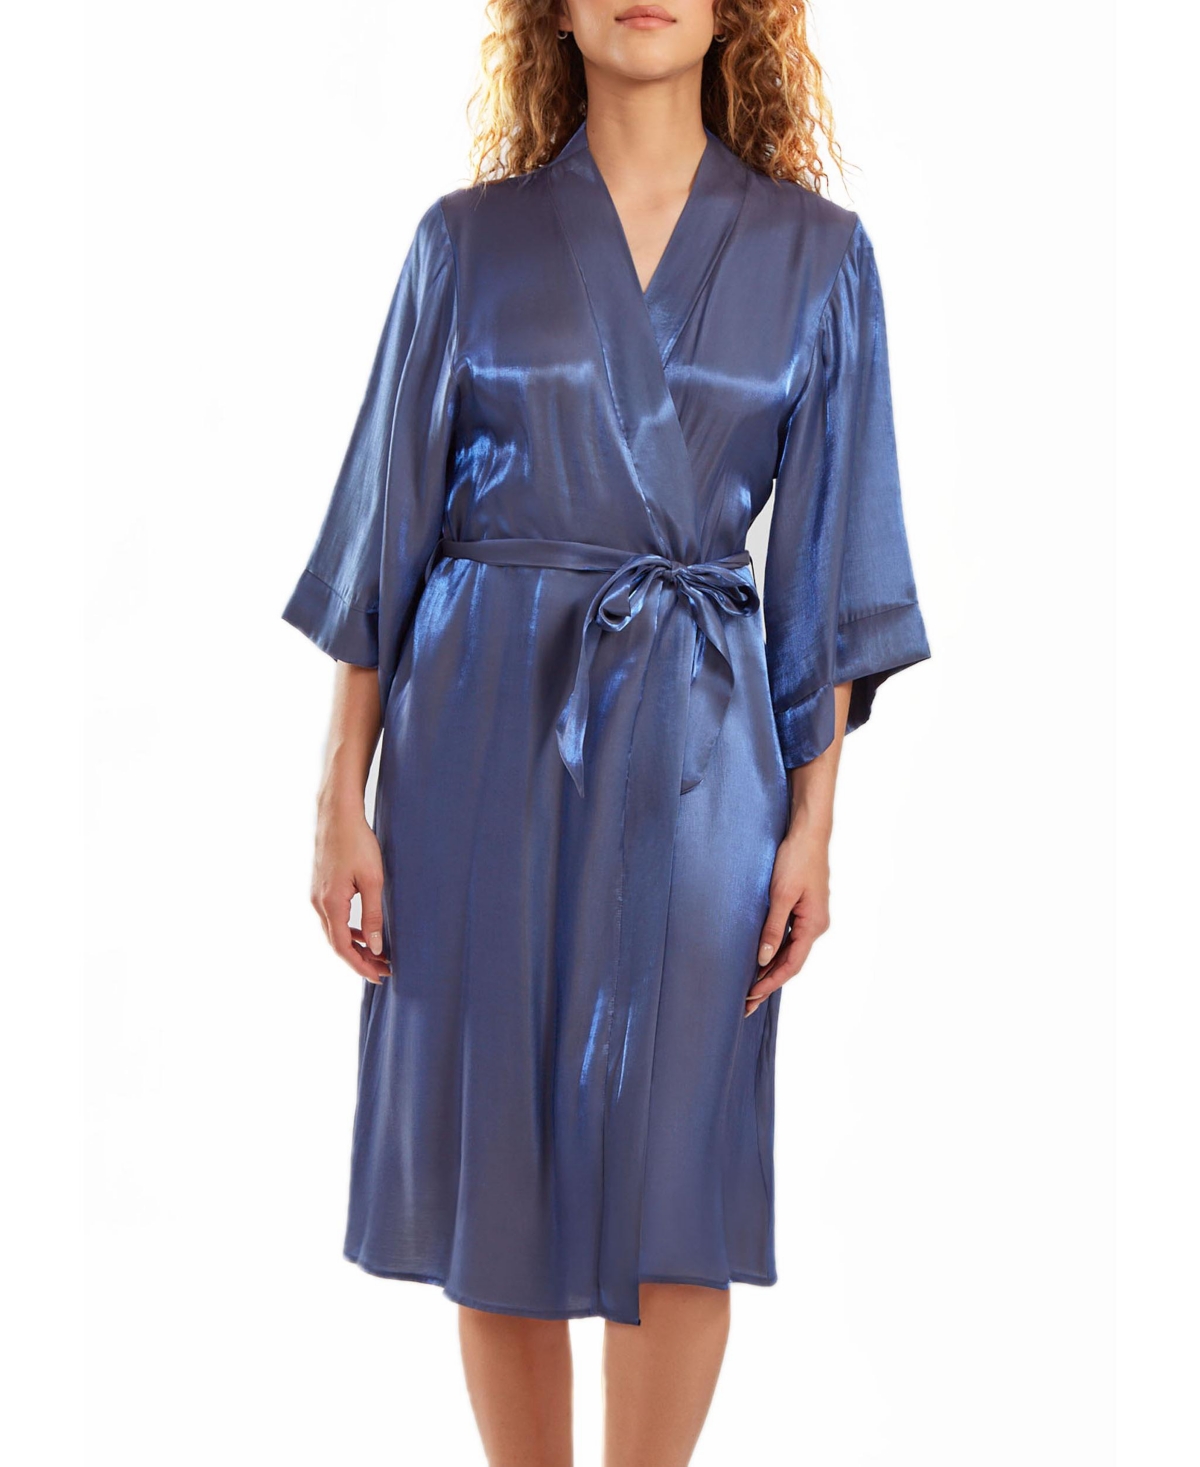 Icollection Skyler Plus Size Irredesant Robe With Self Tie Sash And Inner Ties In Blue